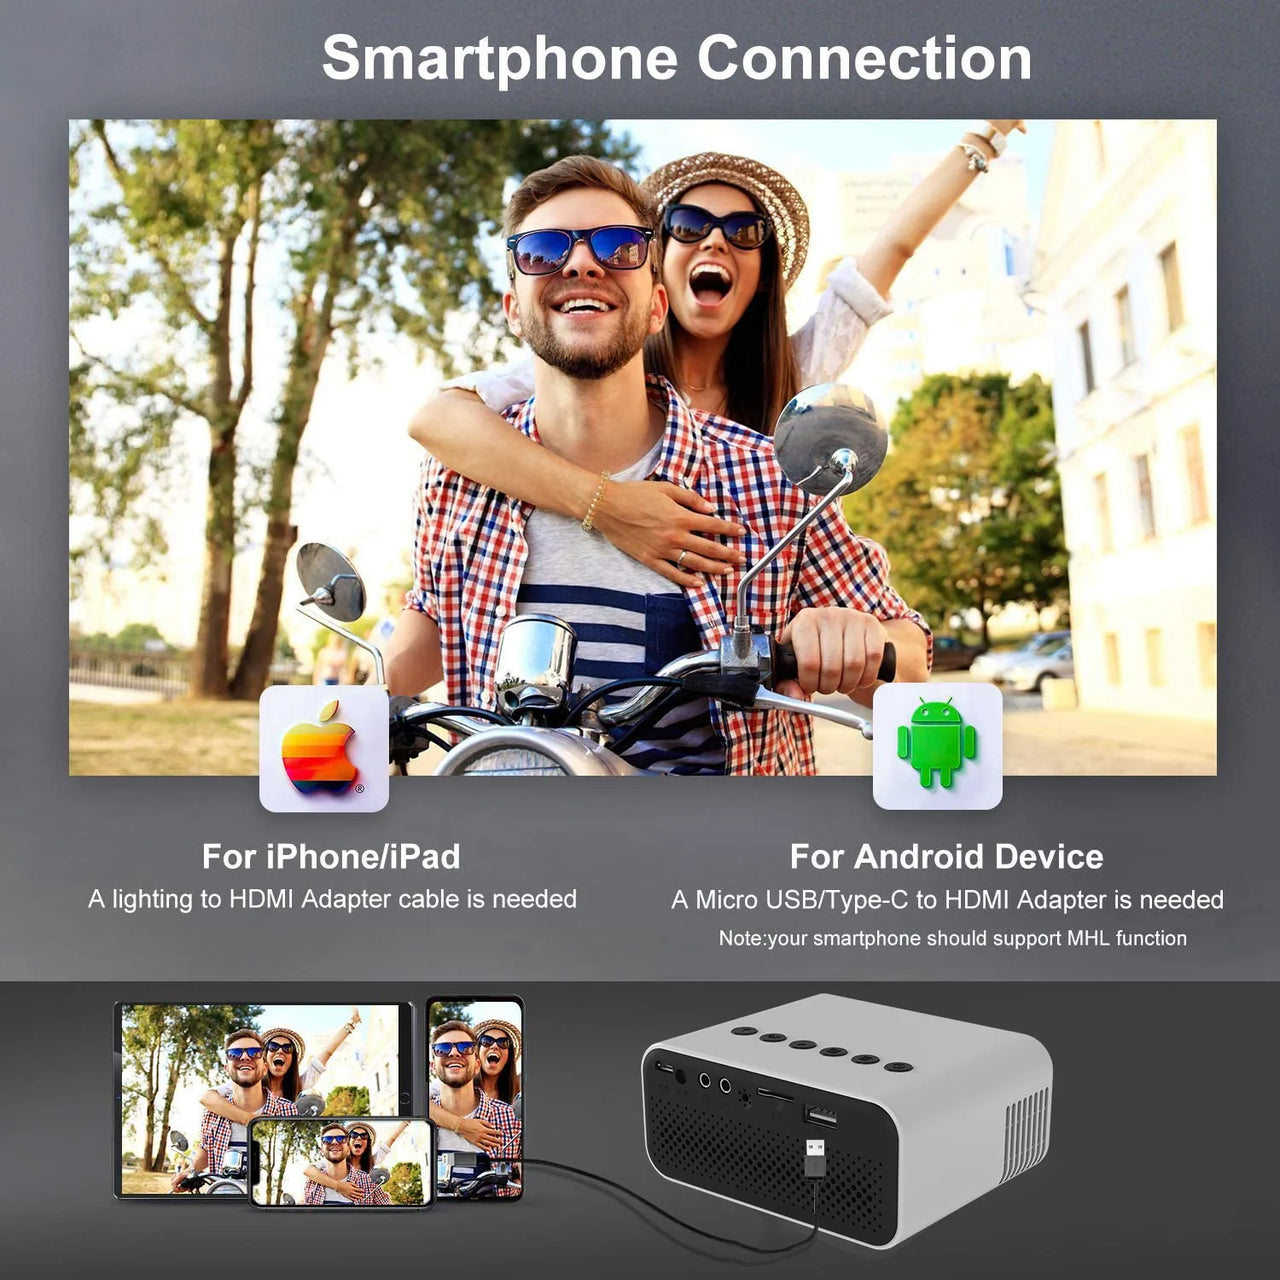 🔥LAST DAY SPECIAL SALE 65% OFF 🔥Mini Projector Wired Screen Mirroring IOS & Android Phone